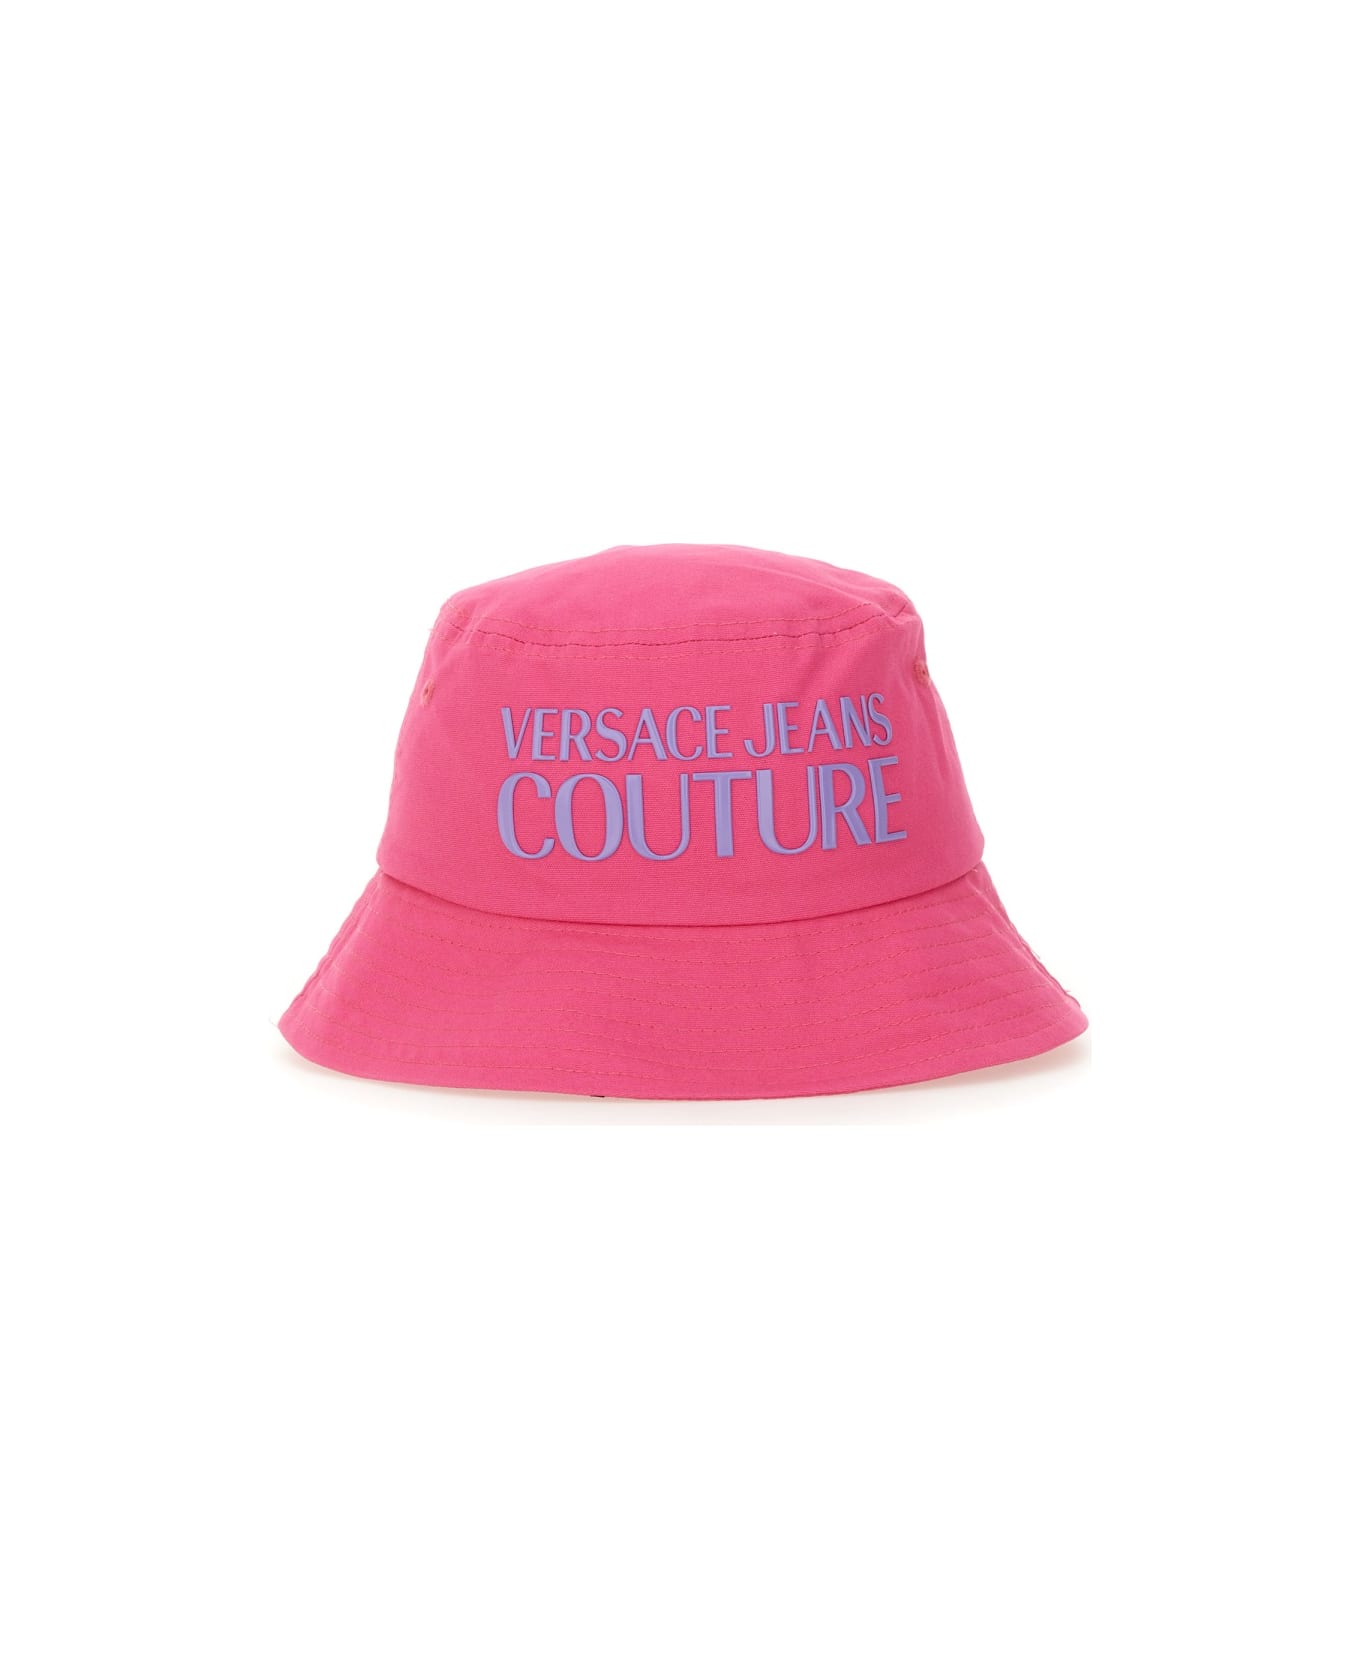 Versace Jeans Couture Bucket Hat - FUCHSIA